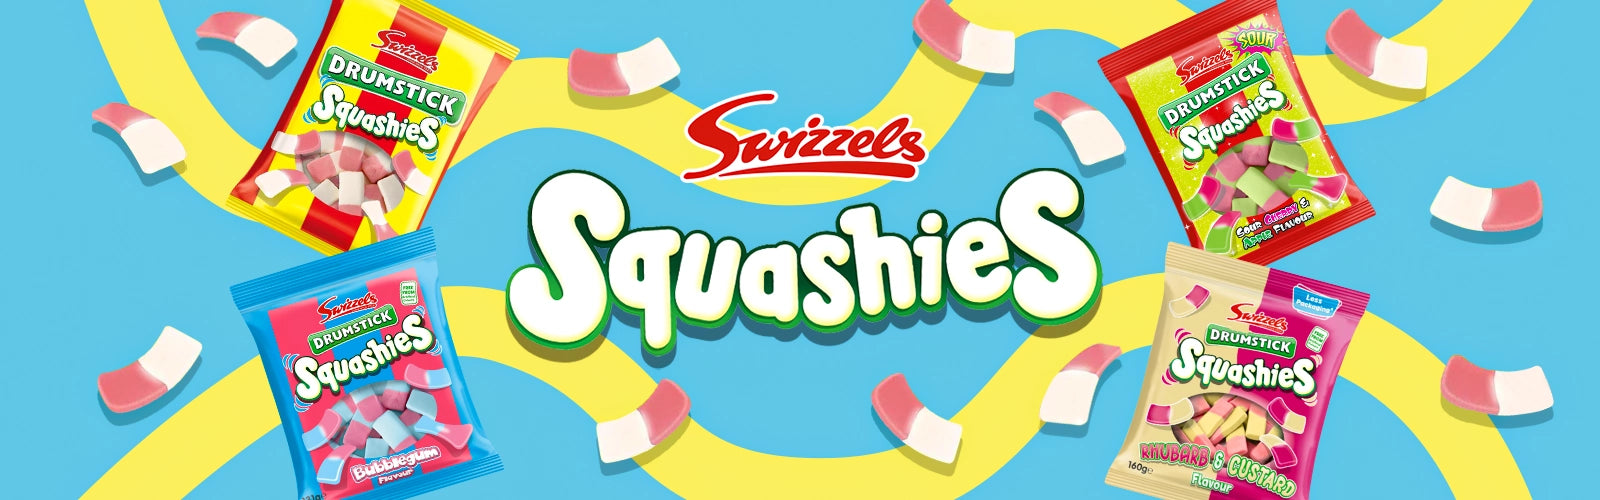 Squashies collection banner